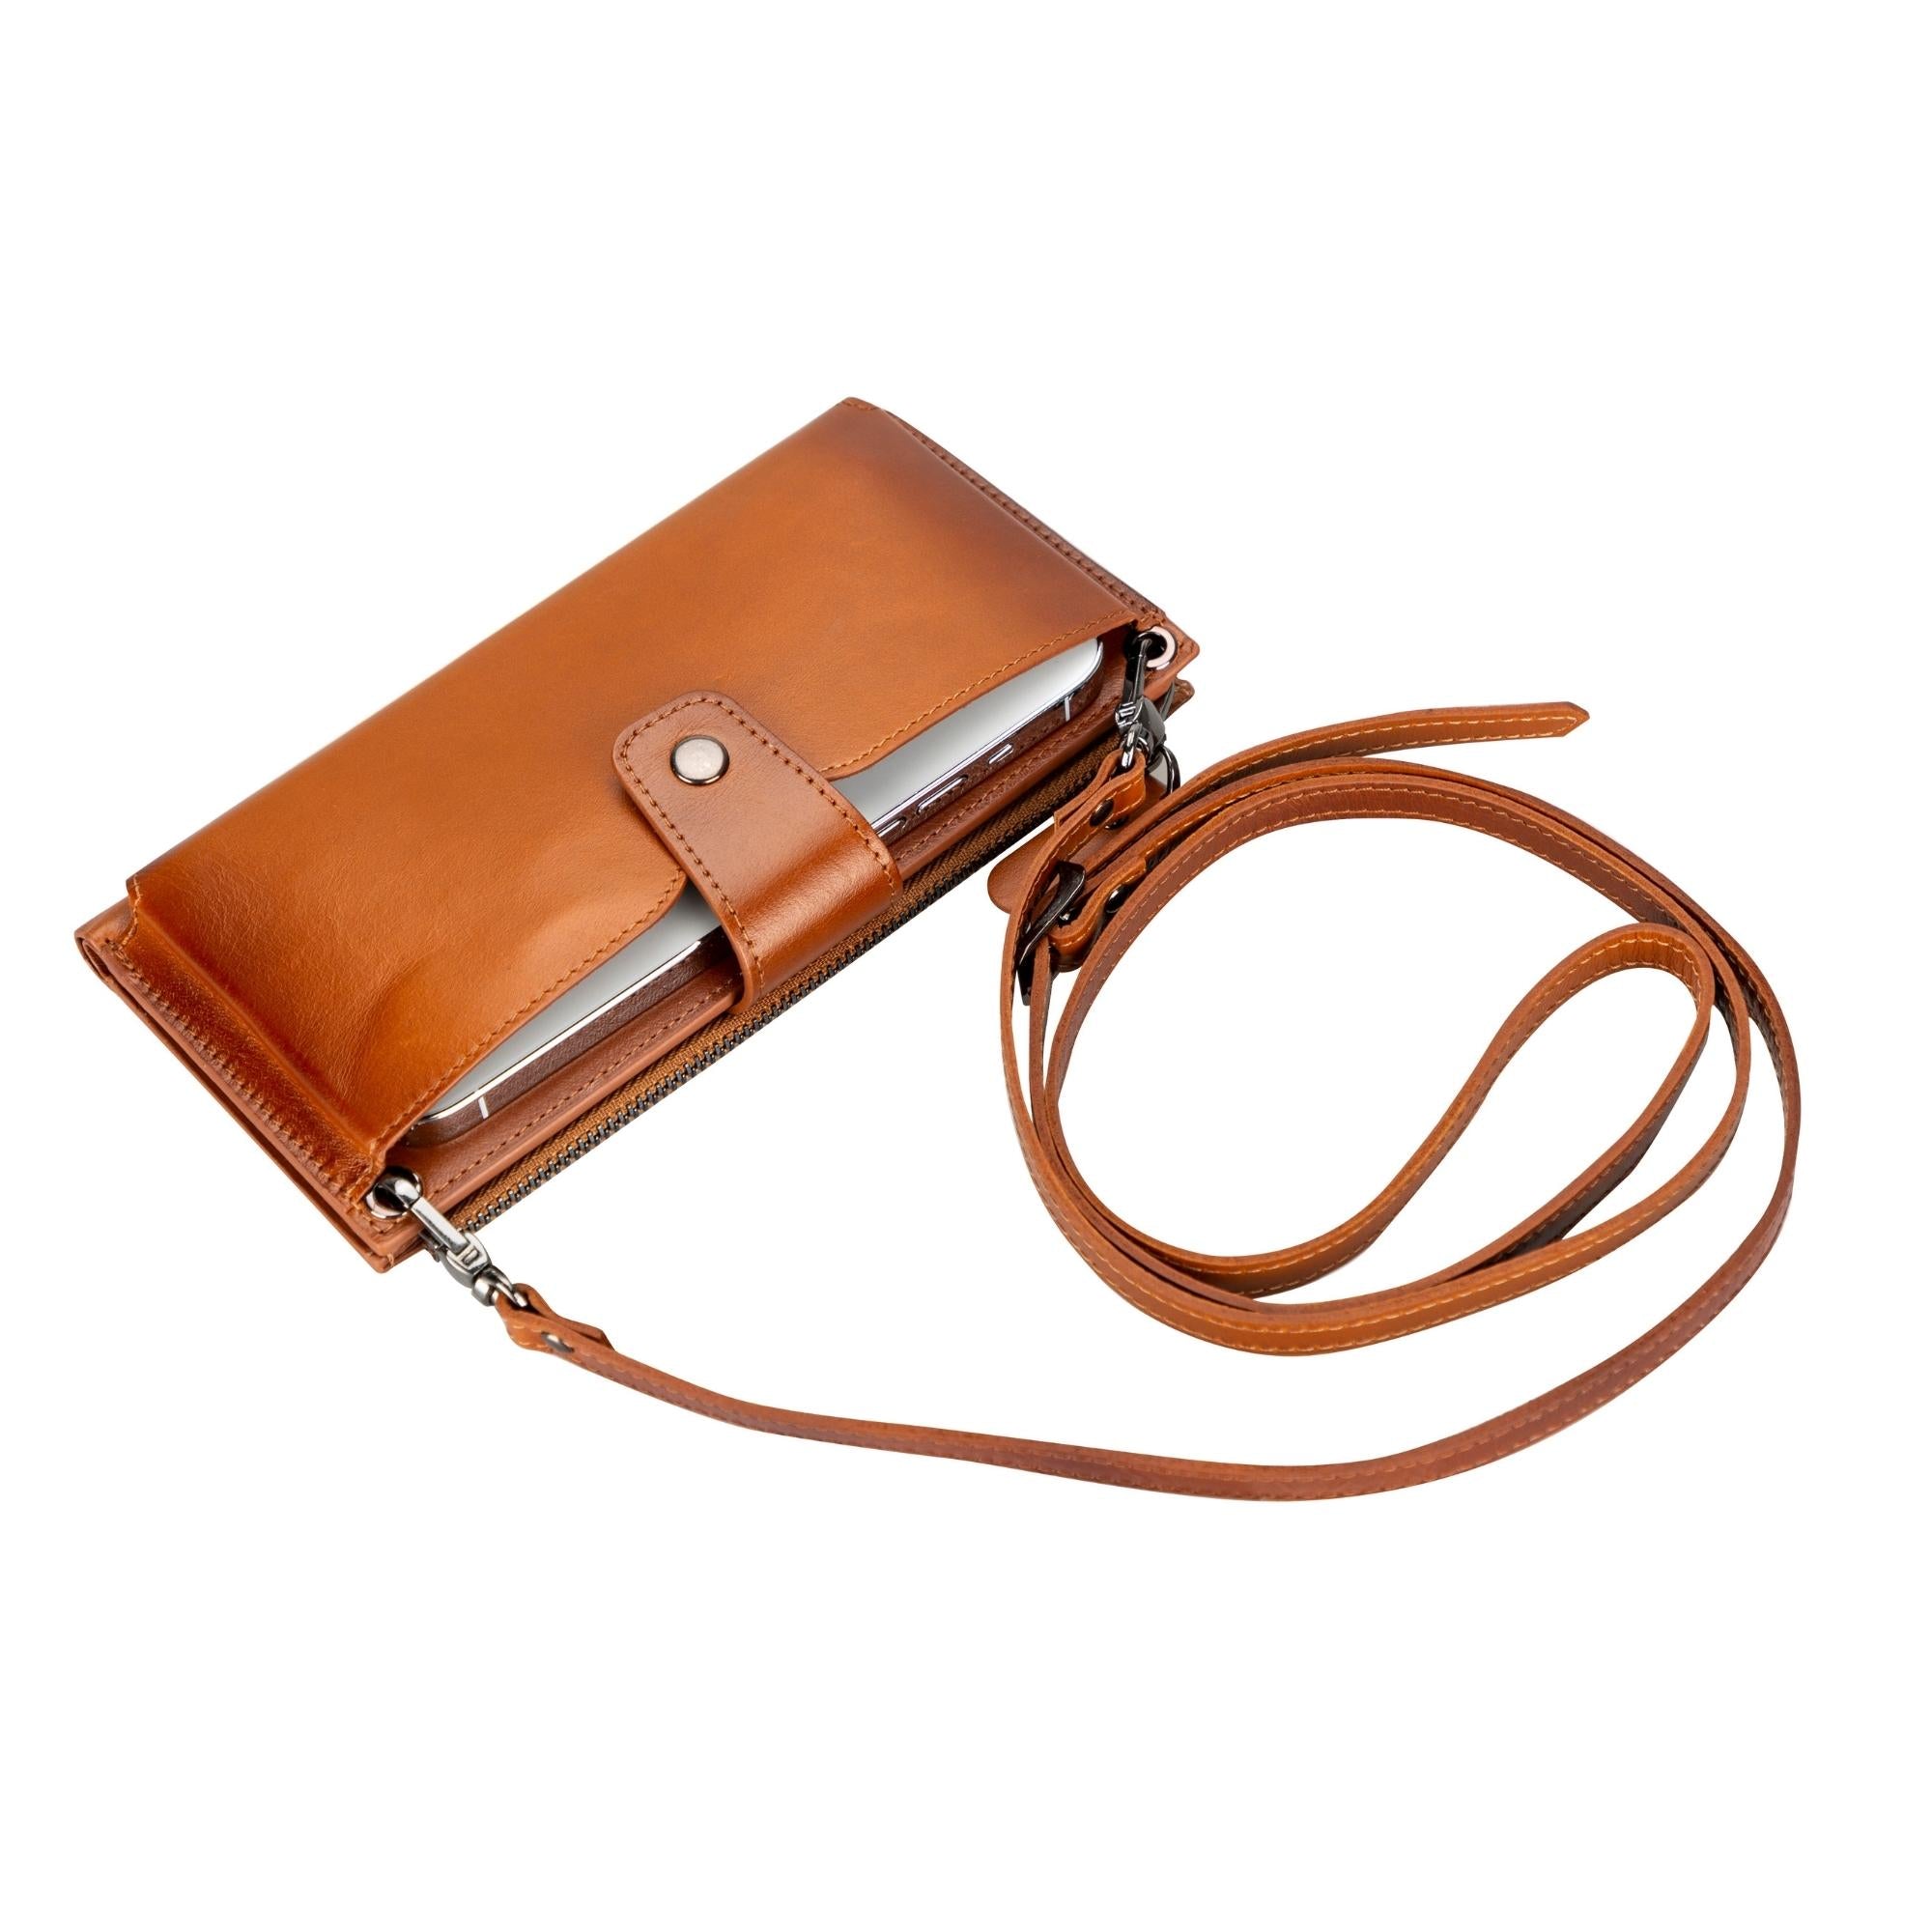 Kaycee Leather Women's Cell Phone Wallet with Strap - Tan - 6.9" - TORONATA